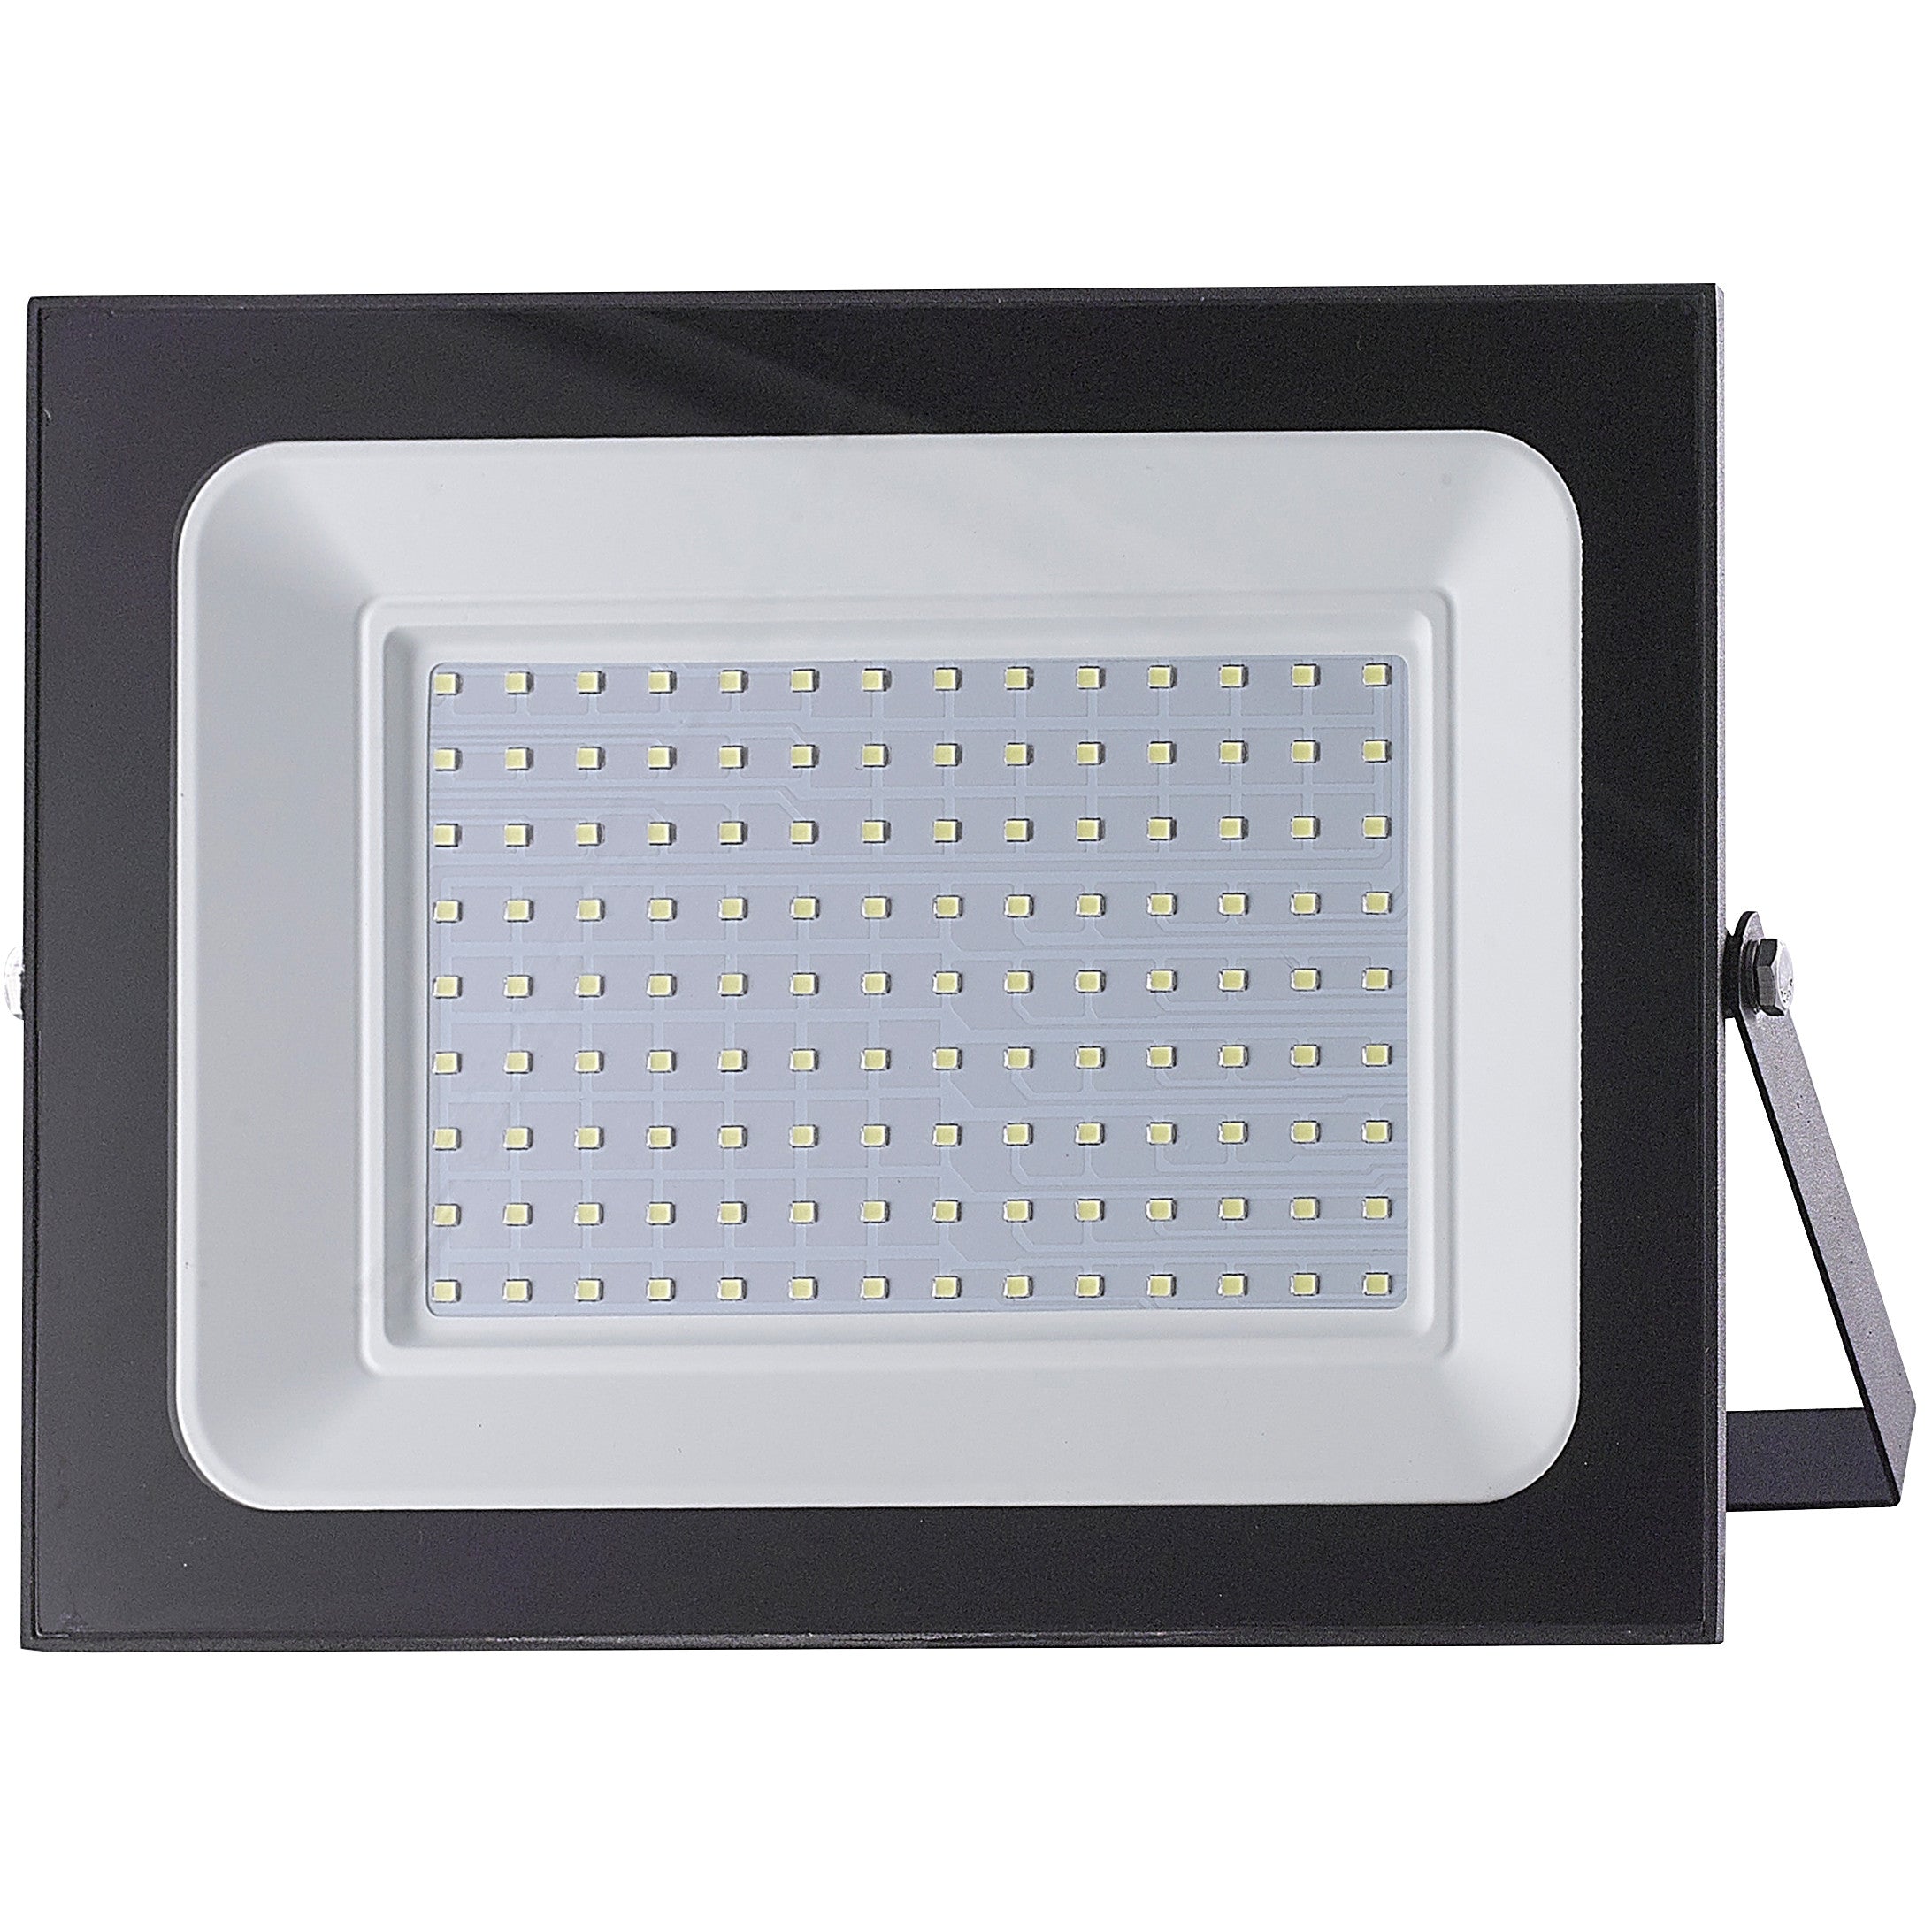 Proiettore led-smd 100w 4000k naturale 8000lm